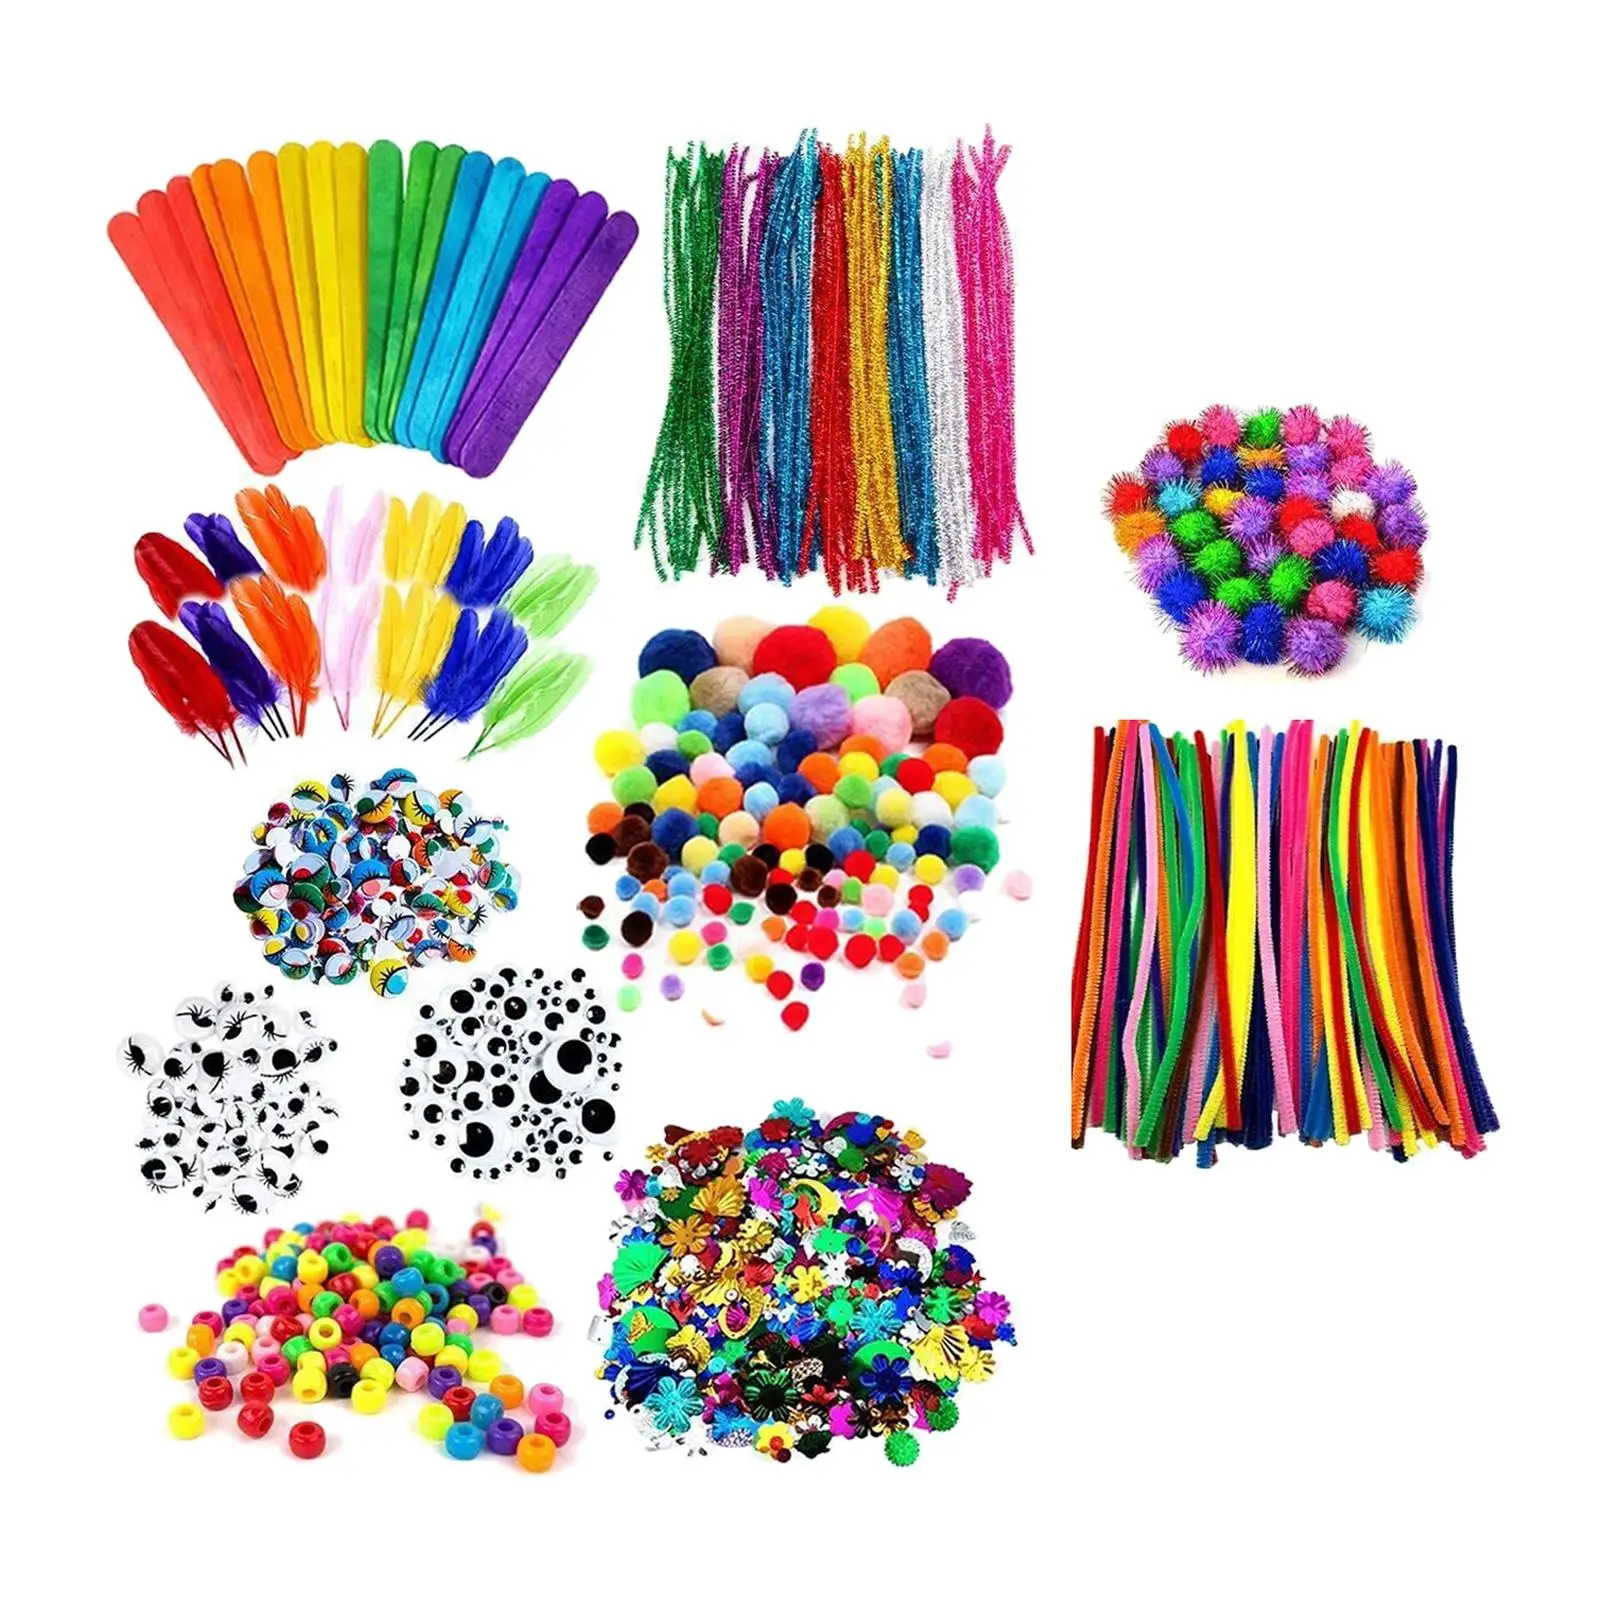 

Arts and Crafts Supplies for Kids Age 4-6, 8-12 Toddler Craft Materials Set for Party Favors Home Kindergarten Crafting Project